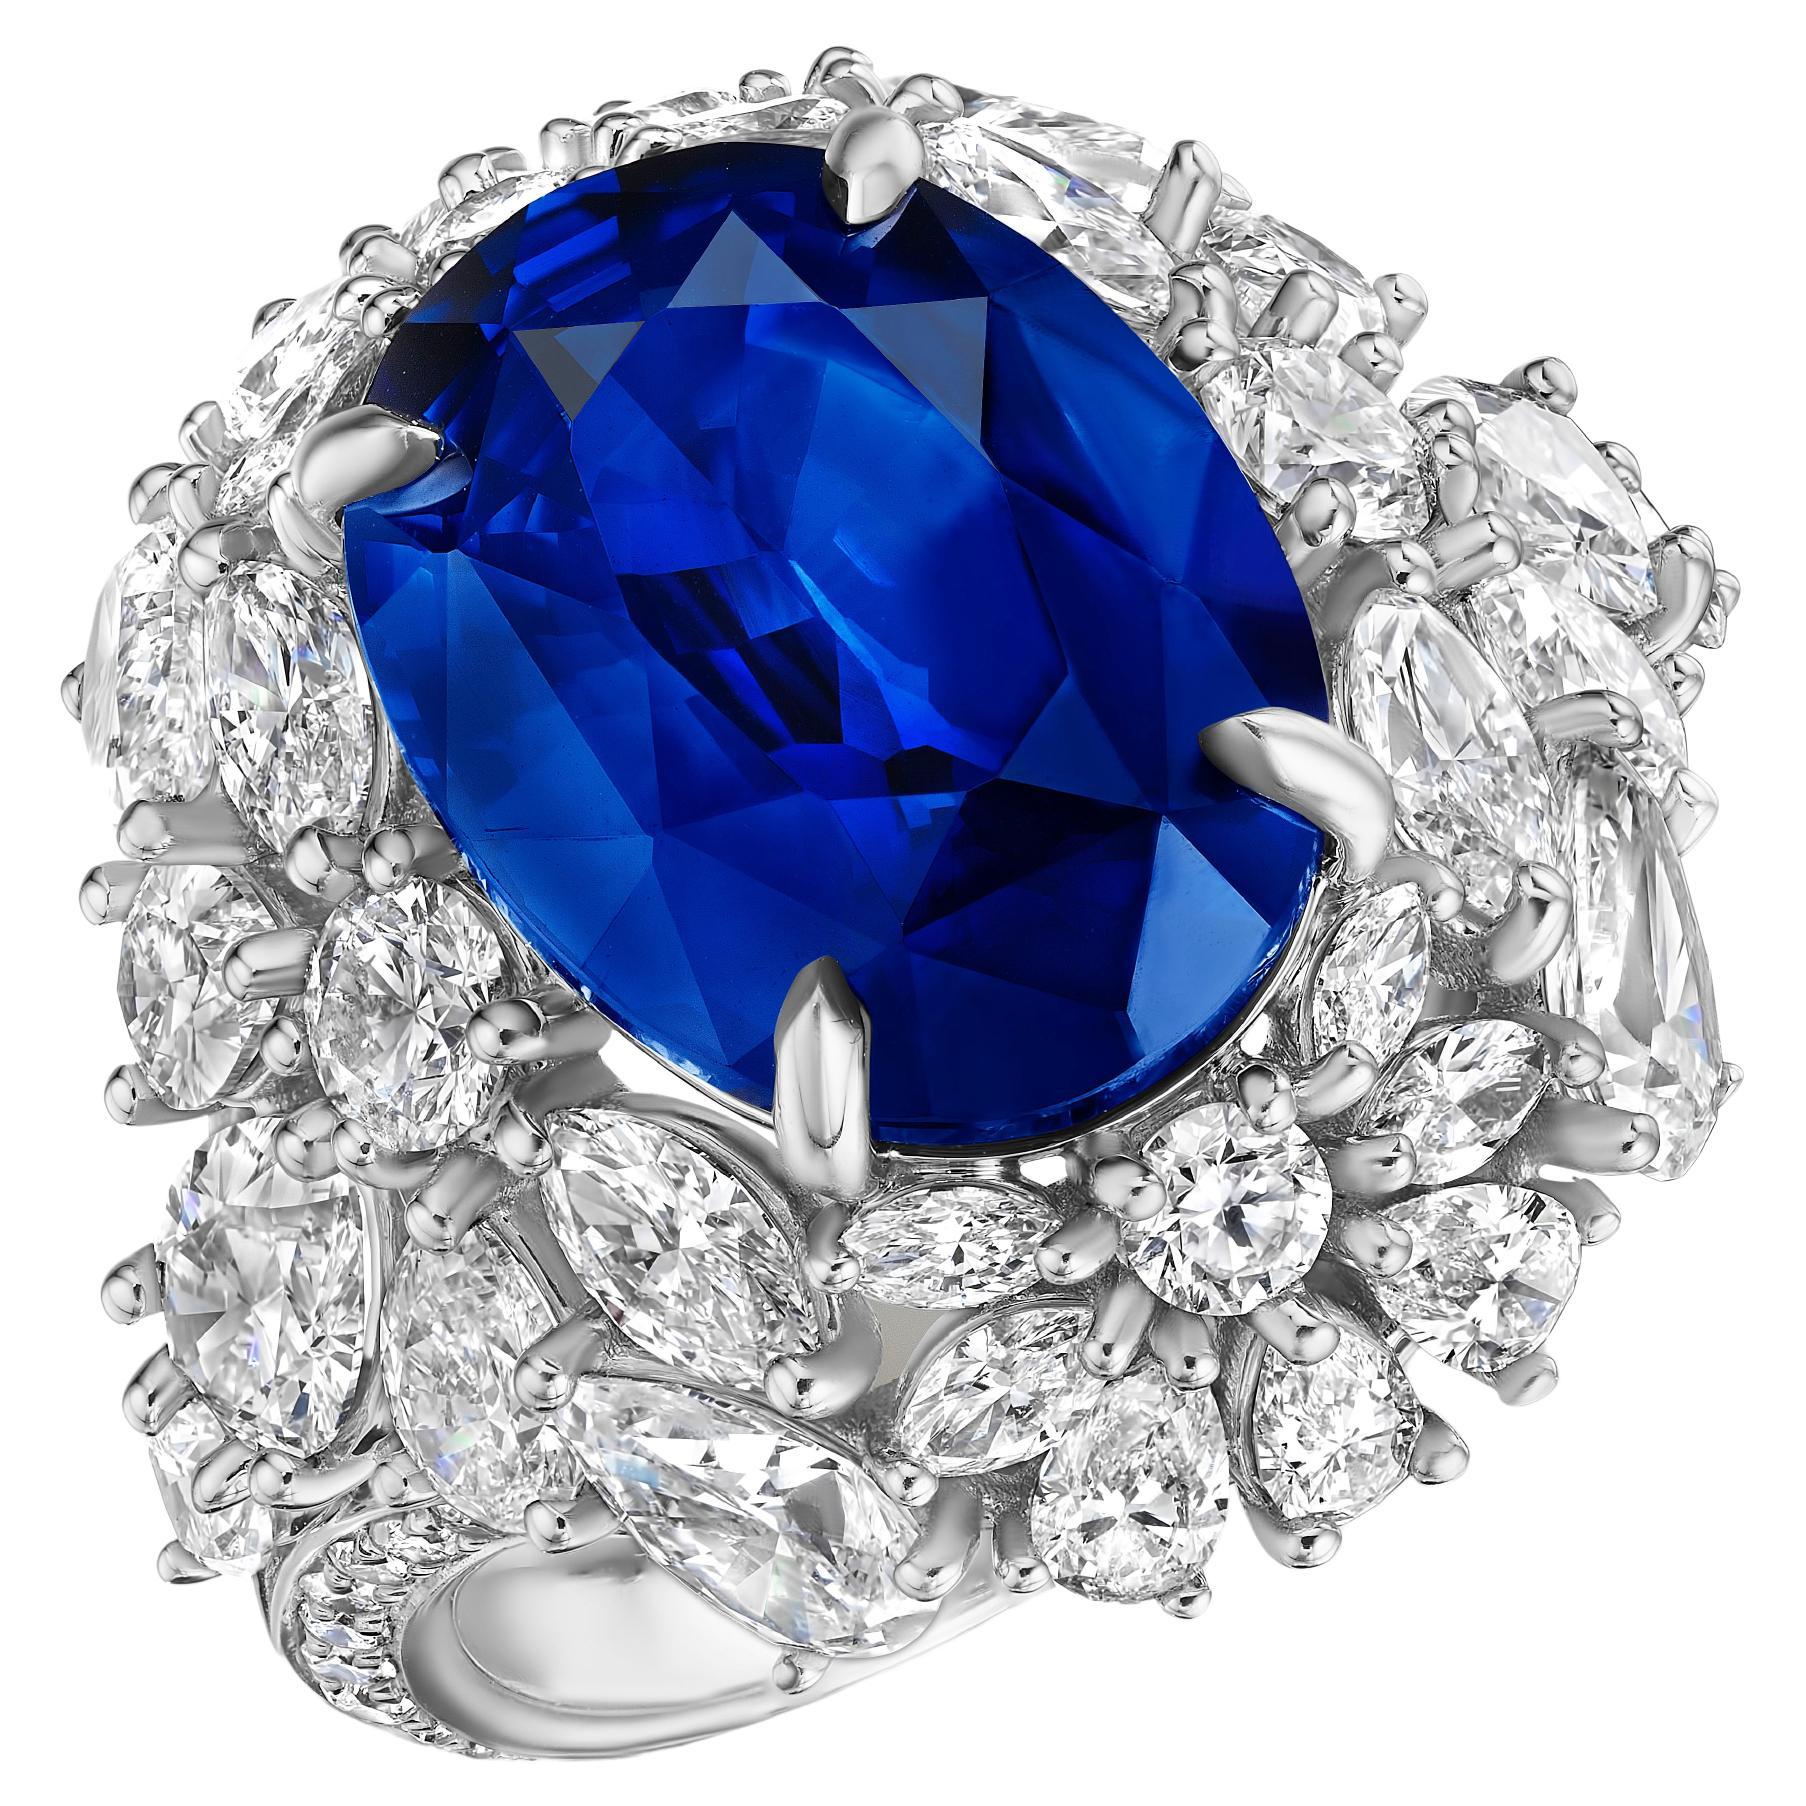 12.46ct GRS Certified Oval Sapphire & Diamond Ring in Platinum